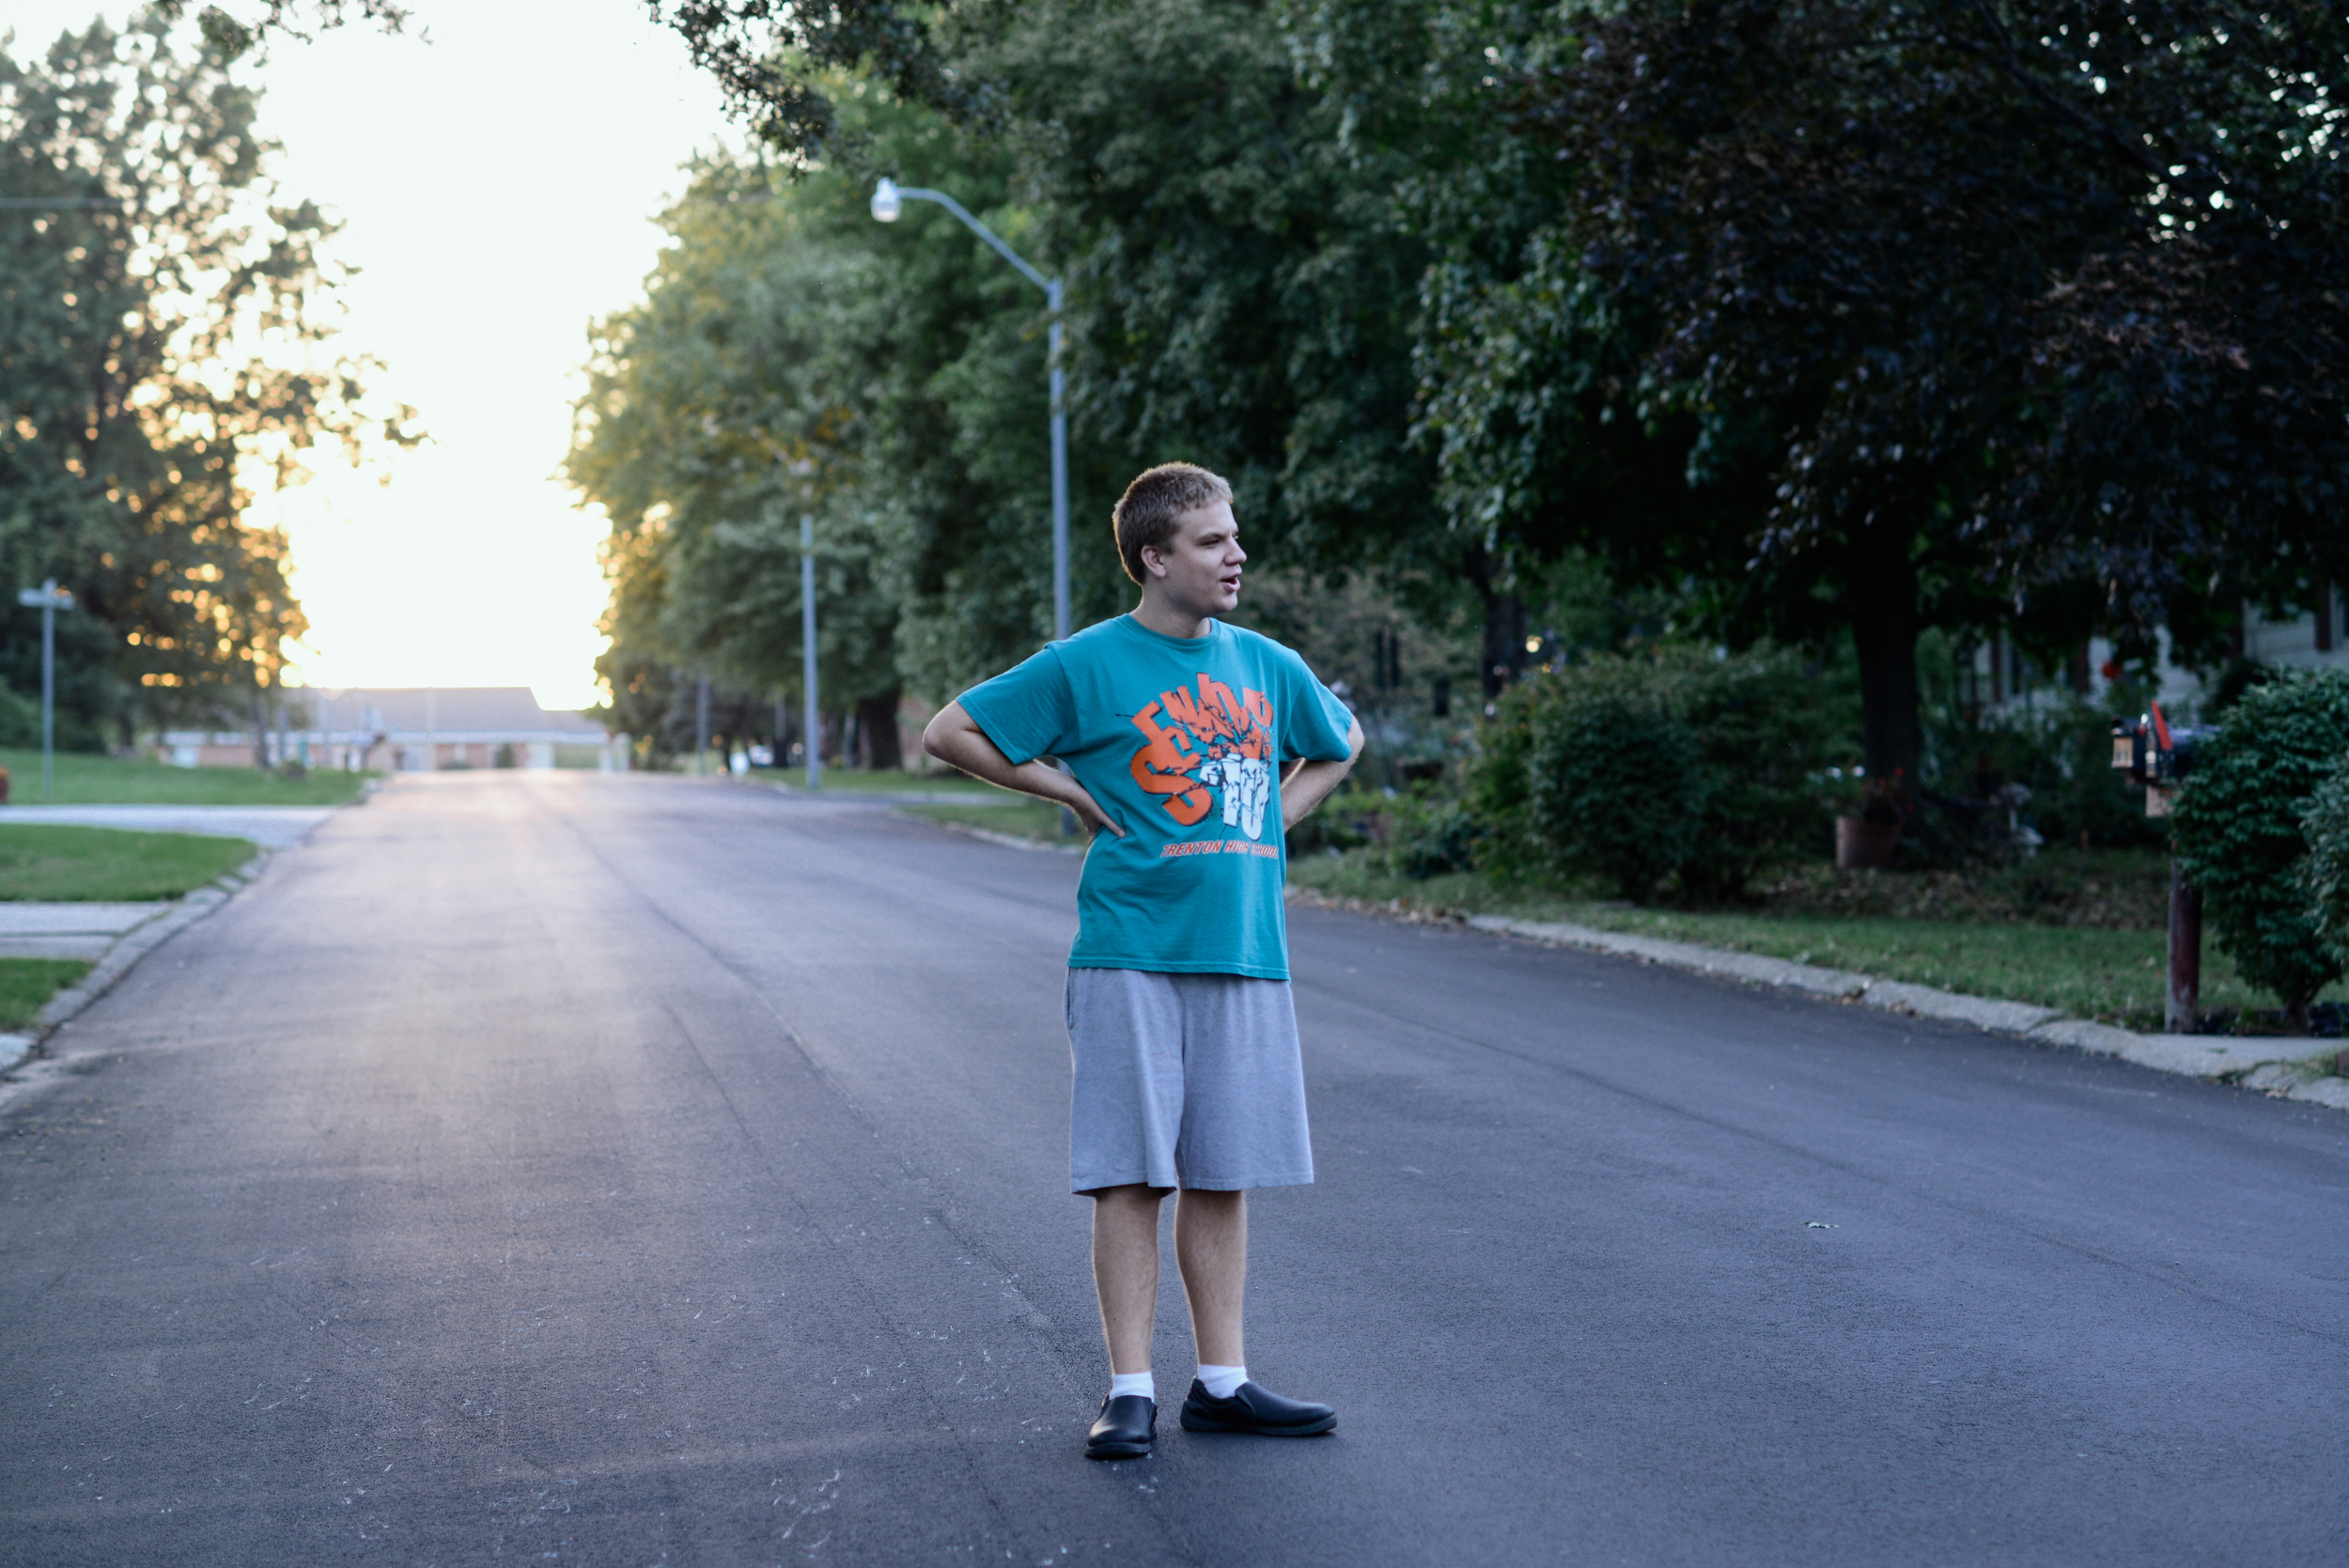  Trenton, Missouri. 2013.  Out on a walk near his home, Dalton visits with neighbors to talk sports and exchange trading cards. 